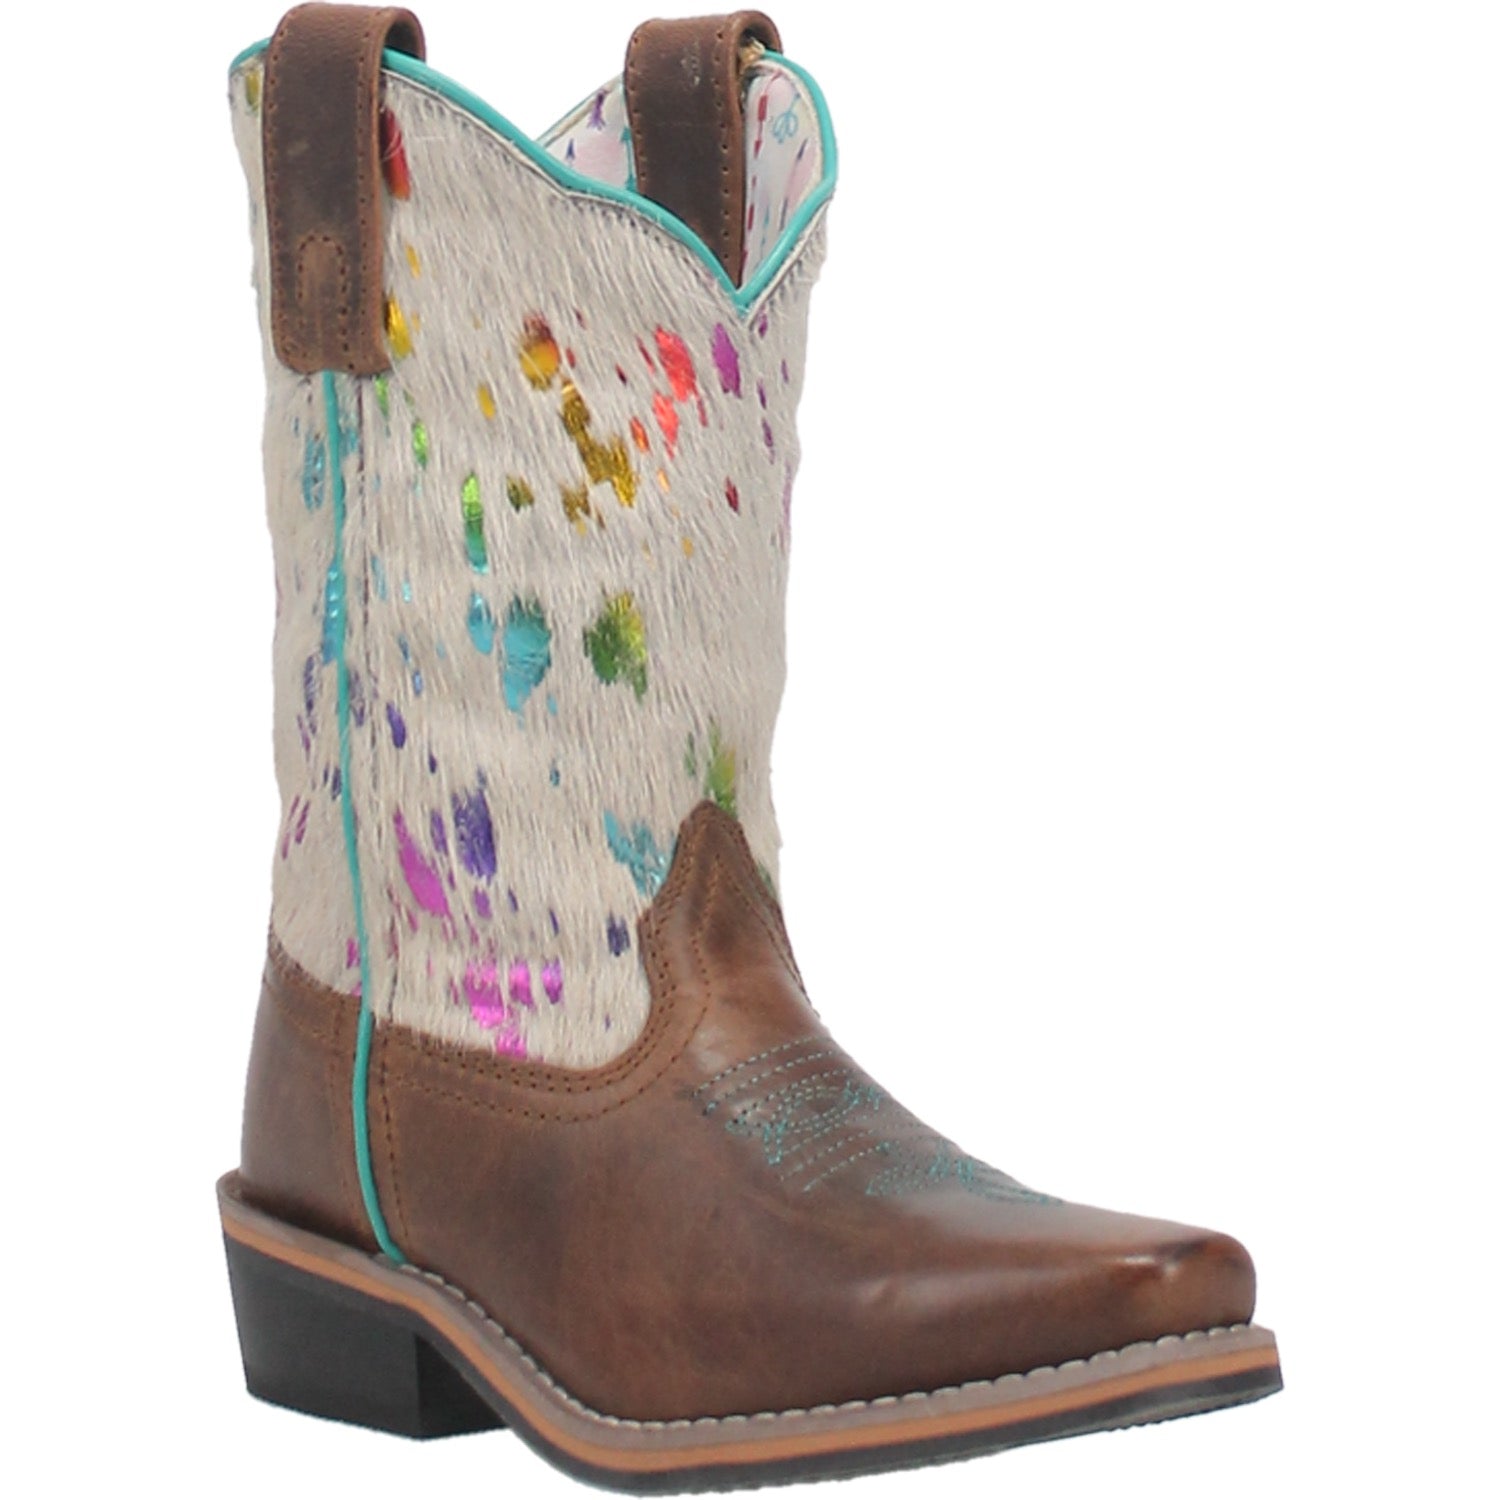 RUMI LEATHER CHILDREN'S BOOT Cover